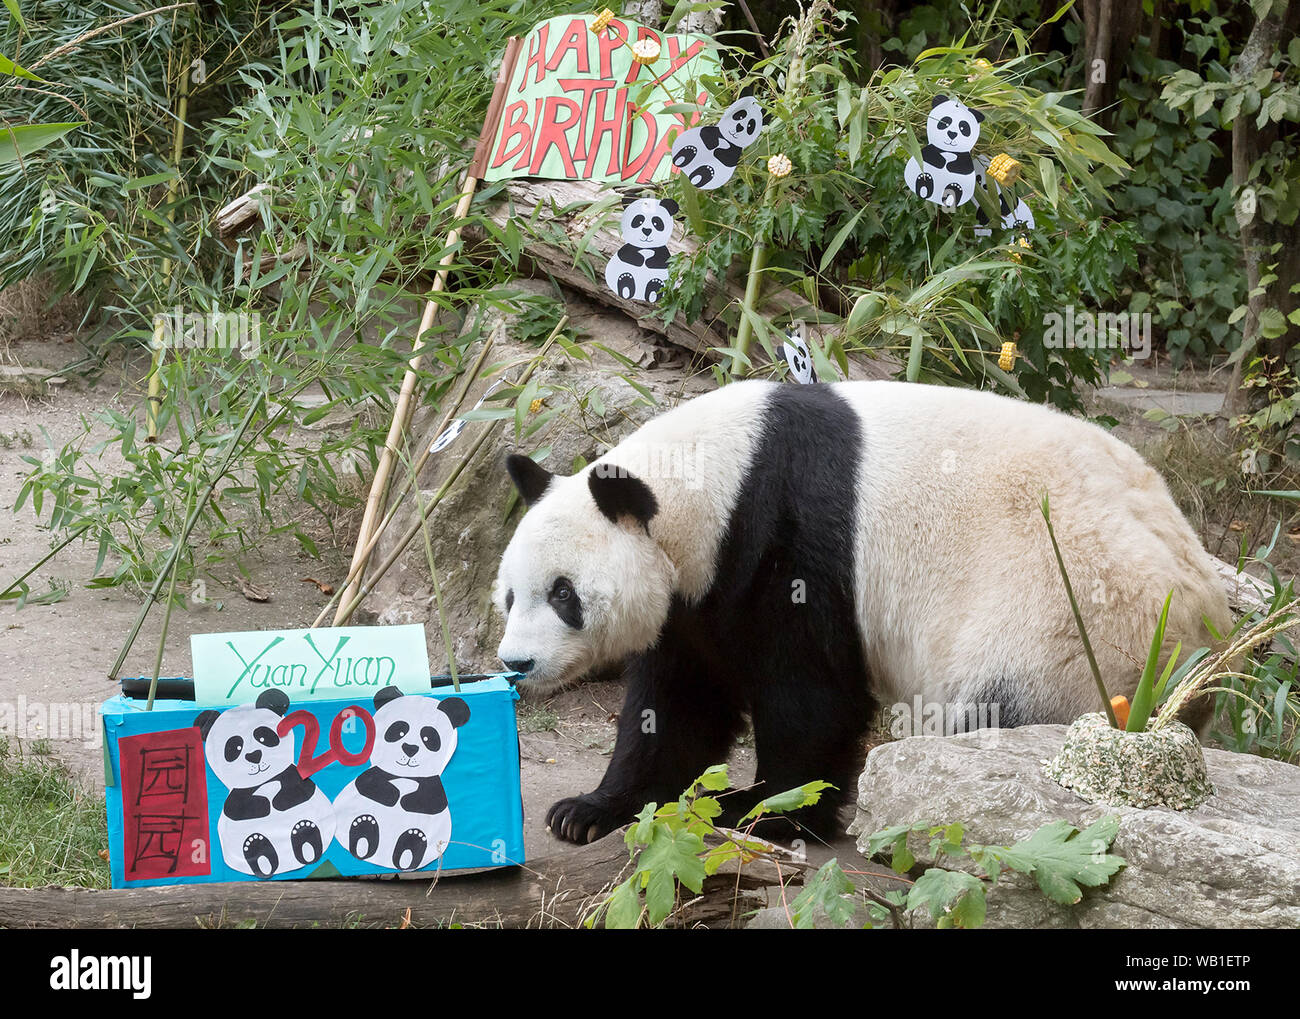 Vienna, Austria. 21st Aug, 2019. Giant Panda Yuan Yuan prepares to eat his birthday meal in the Schonbrunn Zoo in Vienna, Austria, Aug. 21, 2019. The giant panda Yuan Yuan based at the Schonbrunn Zoo in Vienna, Austria, is set to turn 20 years old on Friday with celebrations having already begun, according to the zoo. Credit: Daniel Zupanc/Xinhua Stock Photo